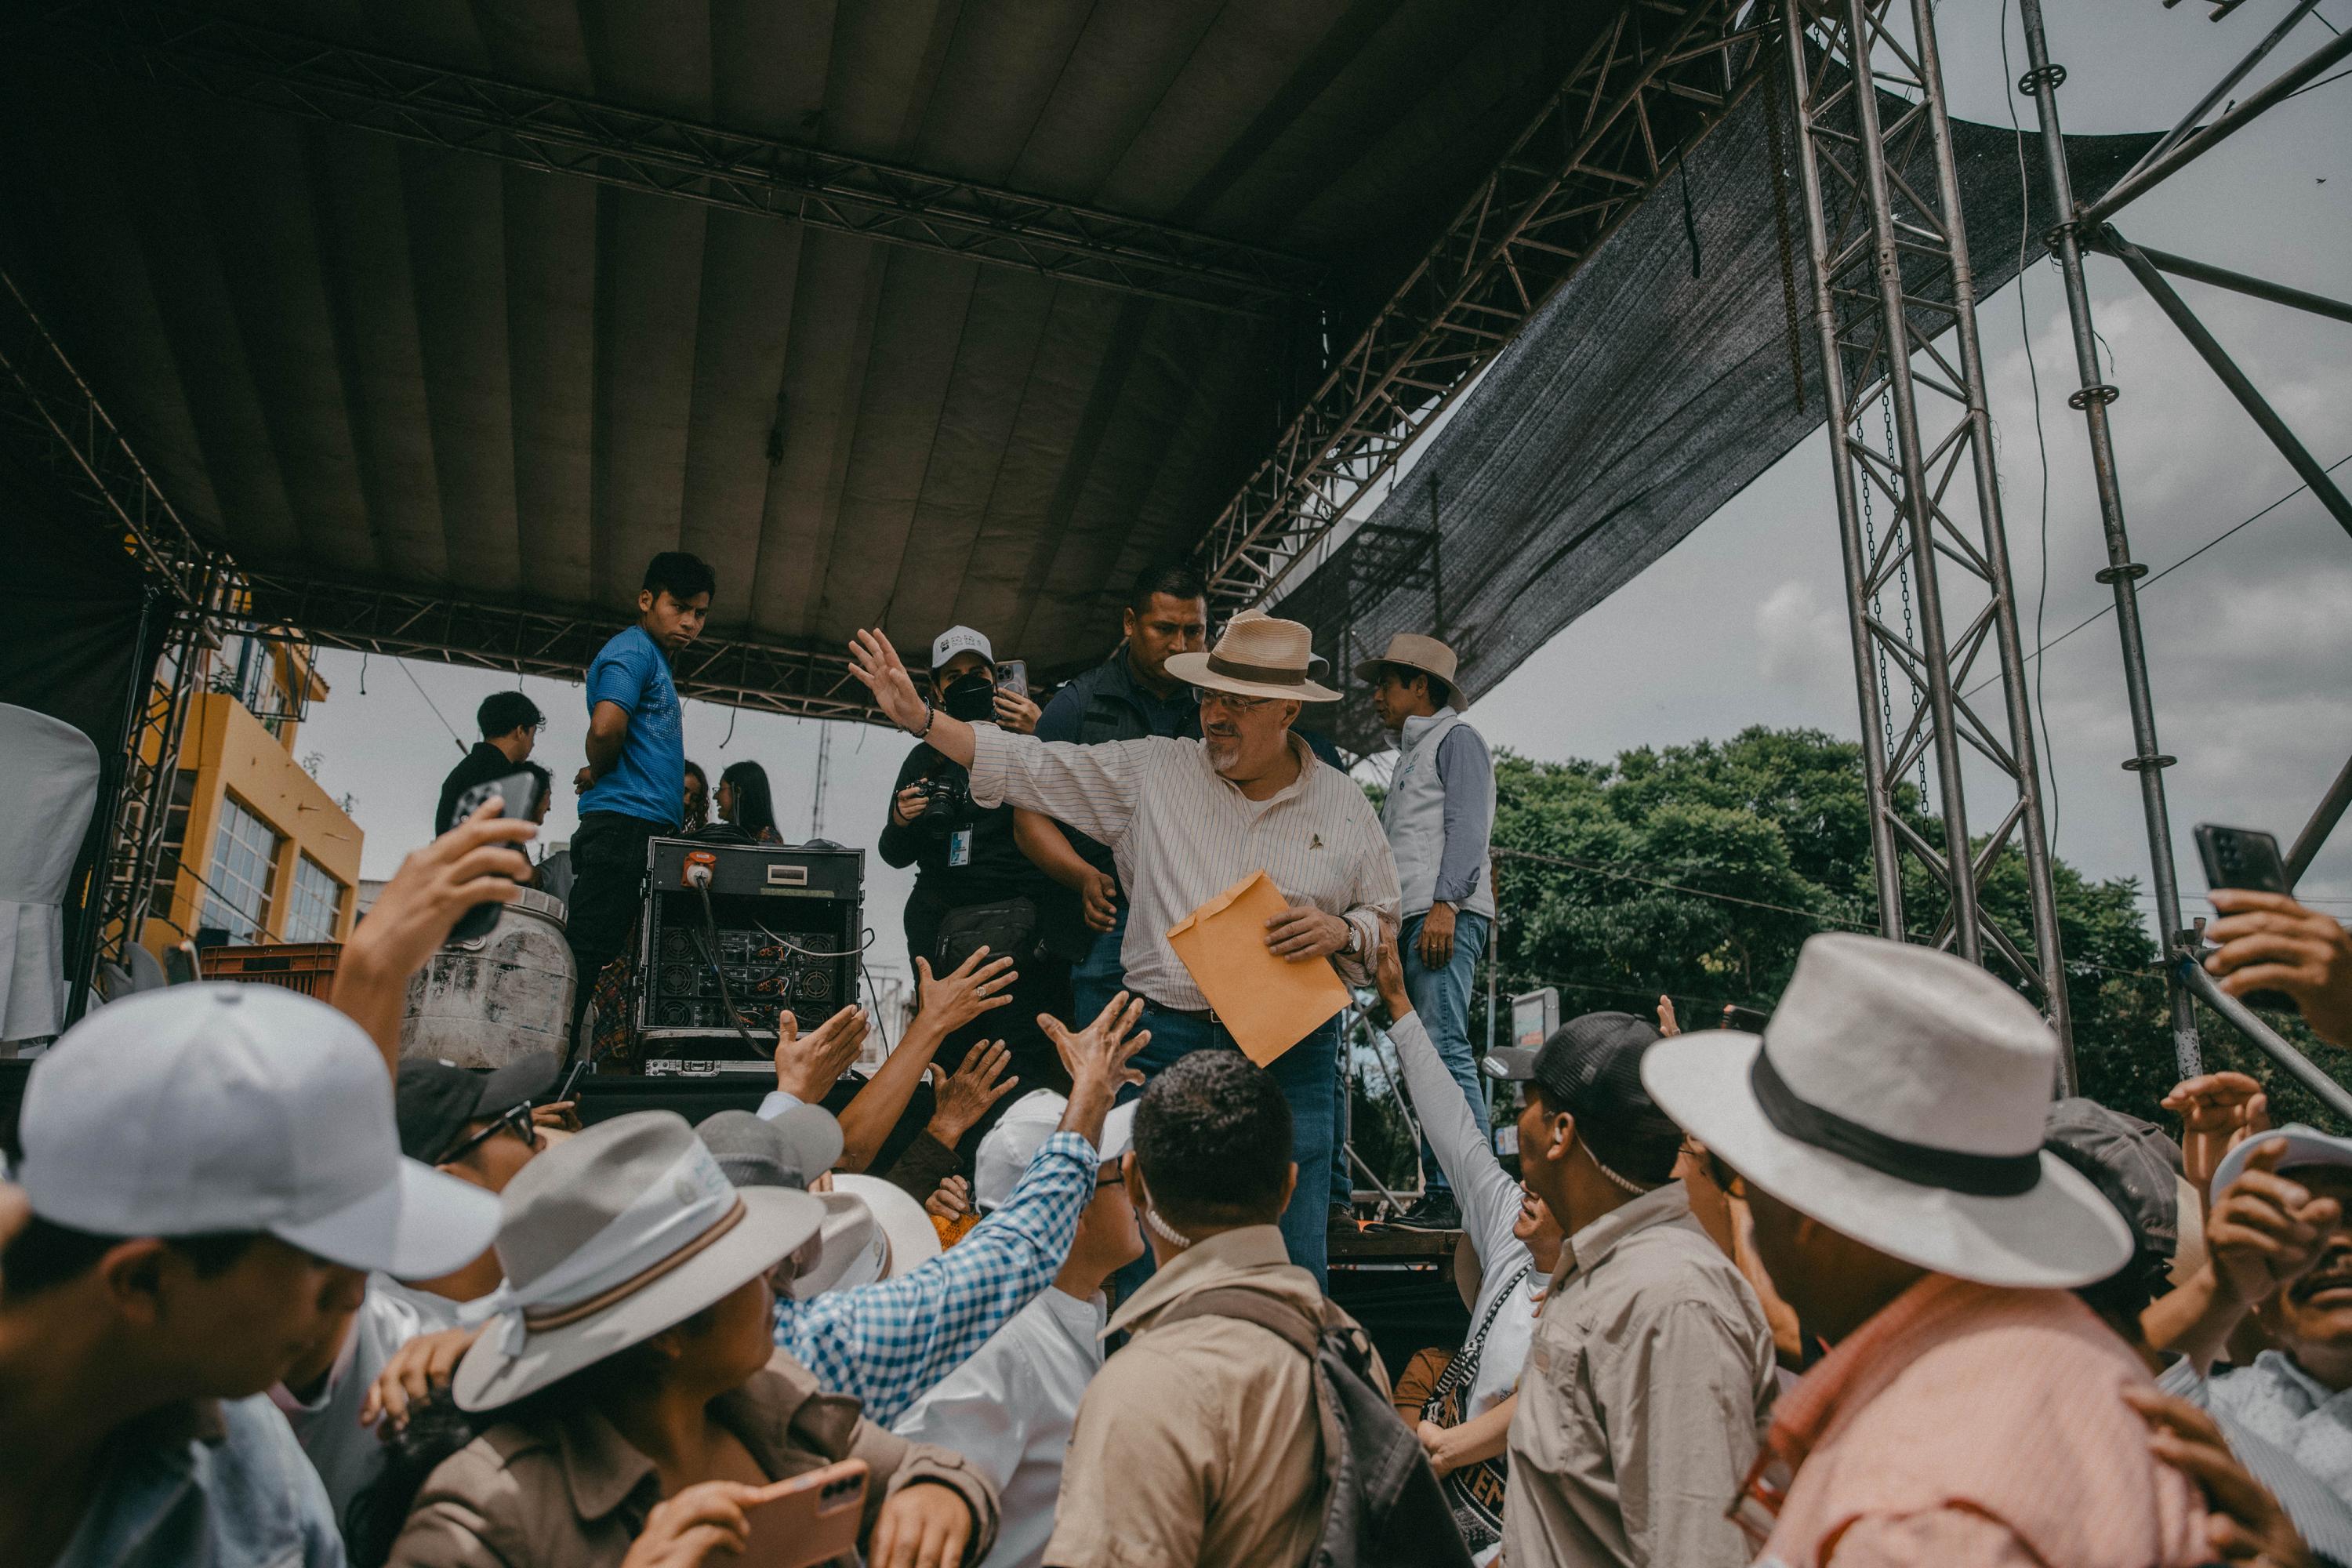 During the last weekend of campaigning before the second round of elections, Arévalo toured western Guatemala. On August 11, after his rally at a town square full of supporters in Santa Cruz del Quiché, dozens of people waited to shake his hand as he stepped off the stage before leaving for Huehuetenango. Photo Carlos Barrera